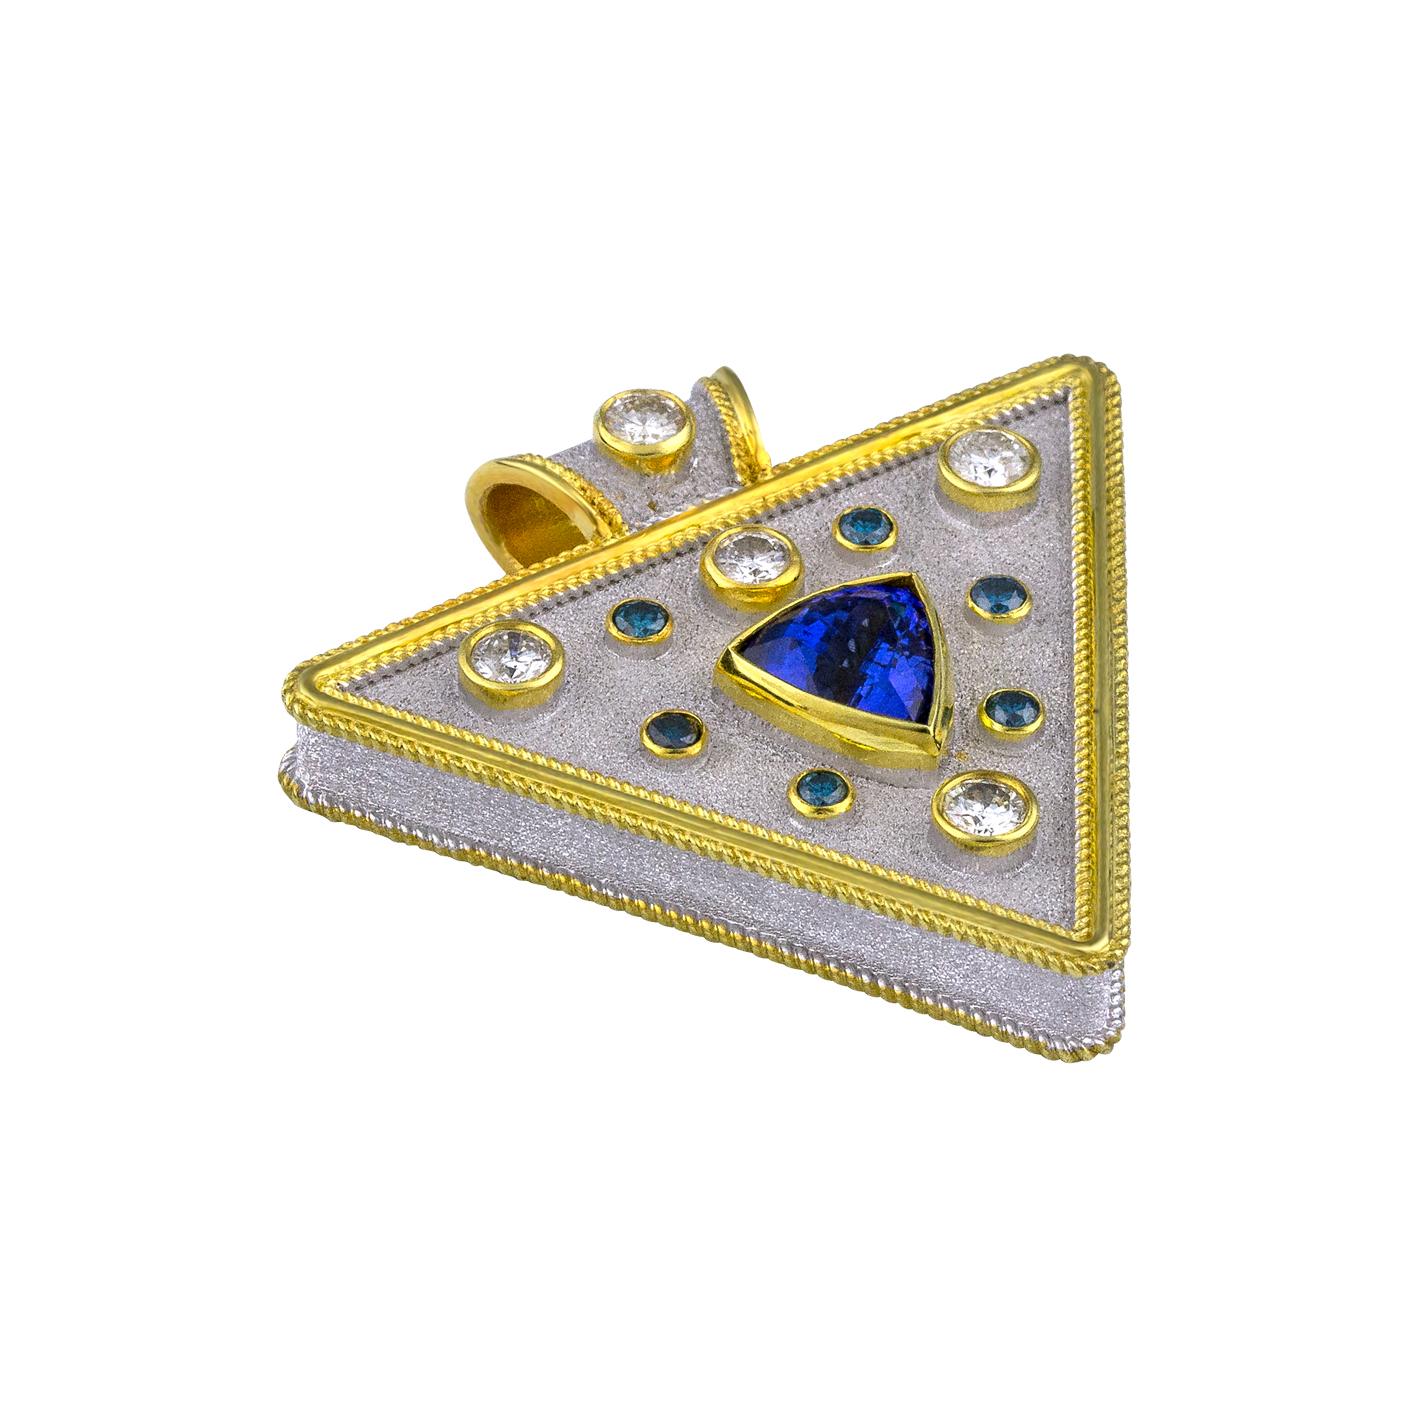 S.Georgios designer pendant enhancer is all handmade in 18 Karat yellow and white gold all custom made. It's microscopically decorated - with granulation work. The background of the pendant has a gorgeous unique velvet look, typical for Byzantine